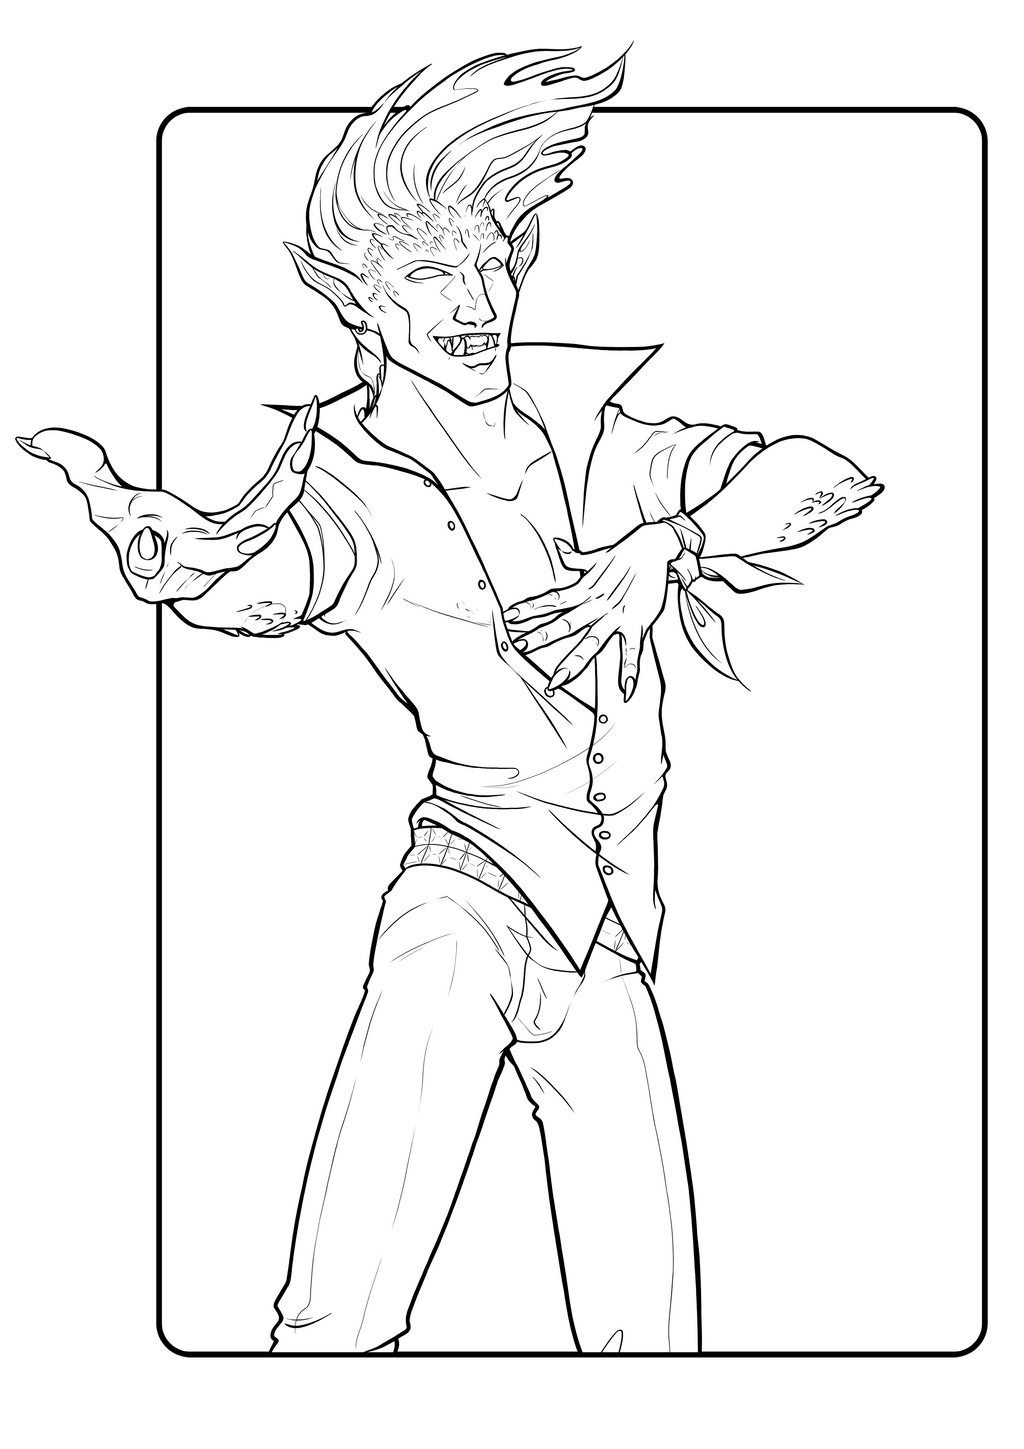 auslander_lineart_by_kevintheradioguy_dd7z0q2-fullview.png